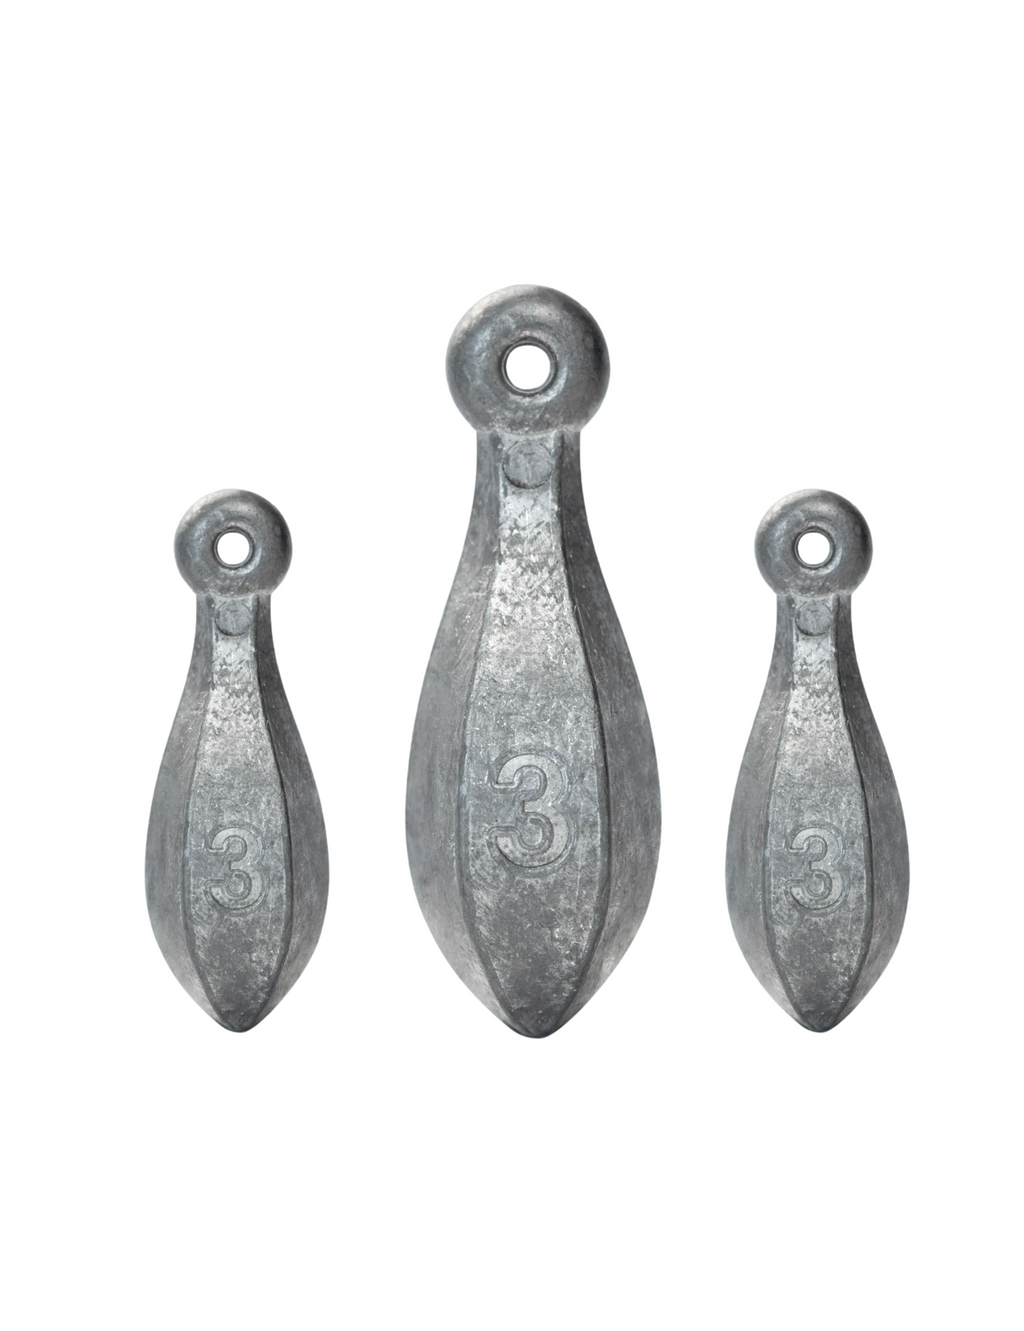 Bluewing Bomb Lead Fishing Sinkers Weights